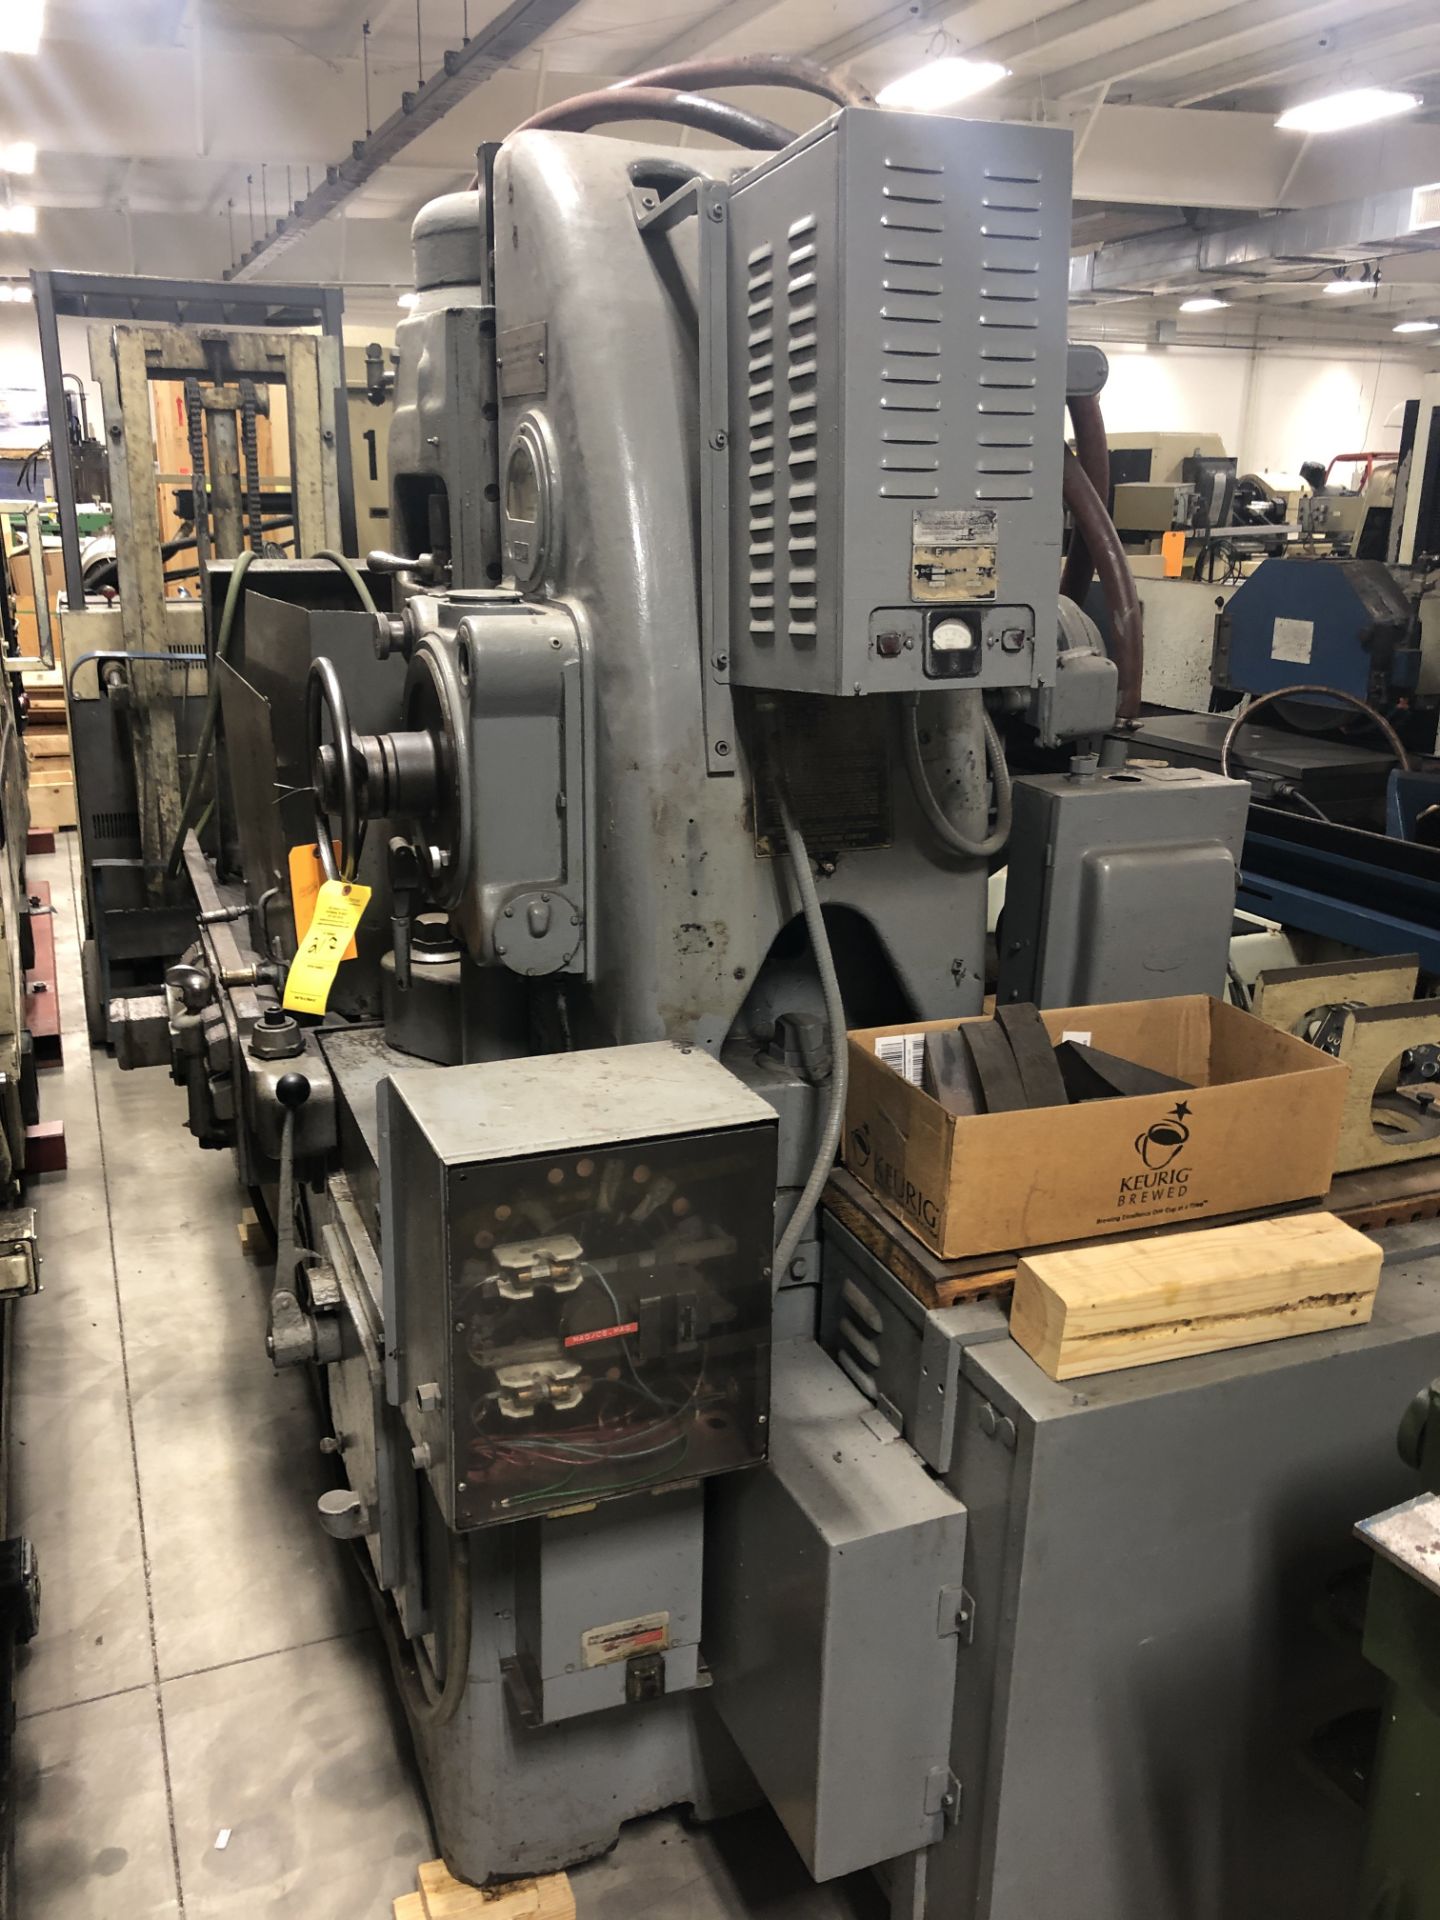 BLANCHARD SURFACE GRINDER NO.18 S#4028 (LOCATED AT: 3939 VANGUARD DRIVE, FORT WAYNE, IN 46809)